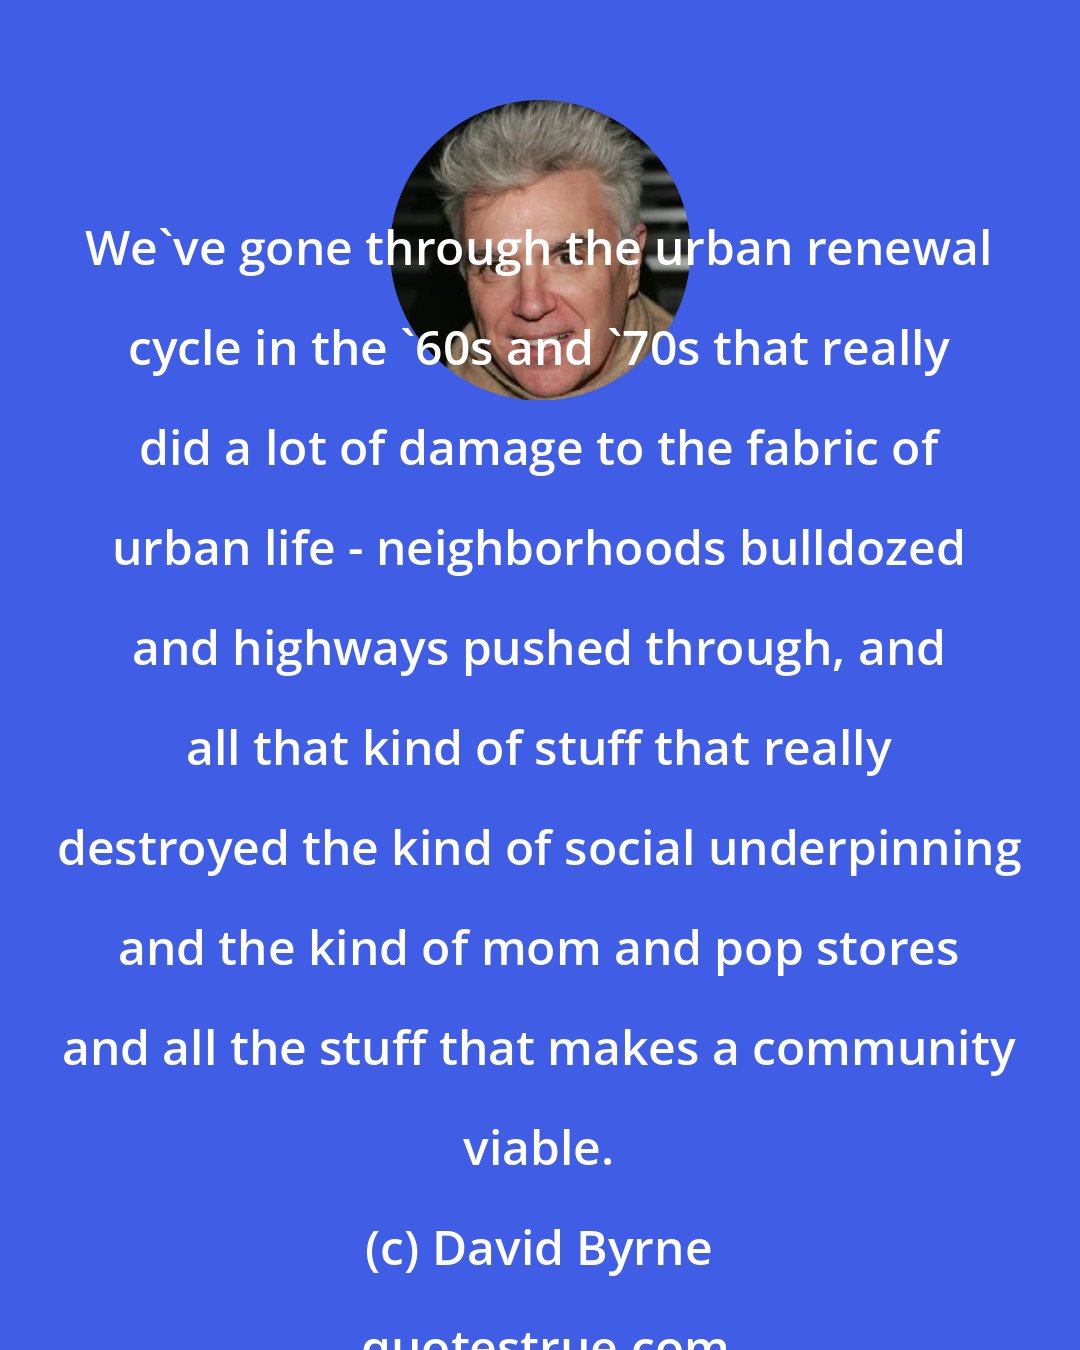 David Byrne: We've gone through the urban renewal cycle in the '60s and '70s that really did a lot of damage to the fabric of urban life - neighborhoods bulldozed and highways pushed through, and all that kind of stuff that really destroyed the kind of social underpinning and the kind of mom and pop stores and all the stuff that makes a community viable.